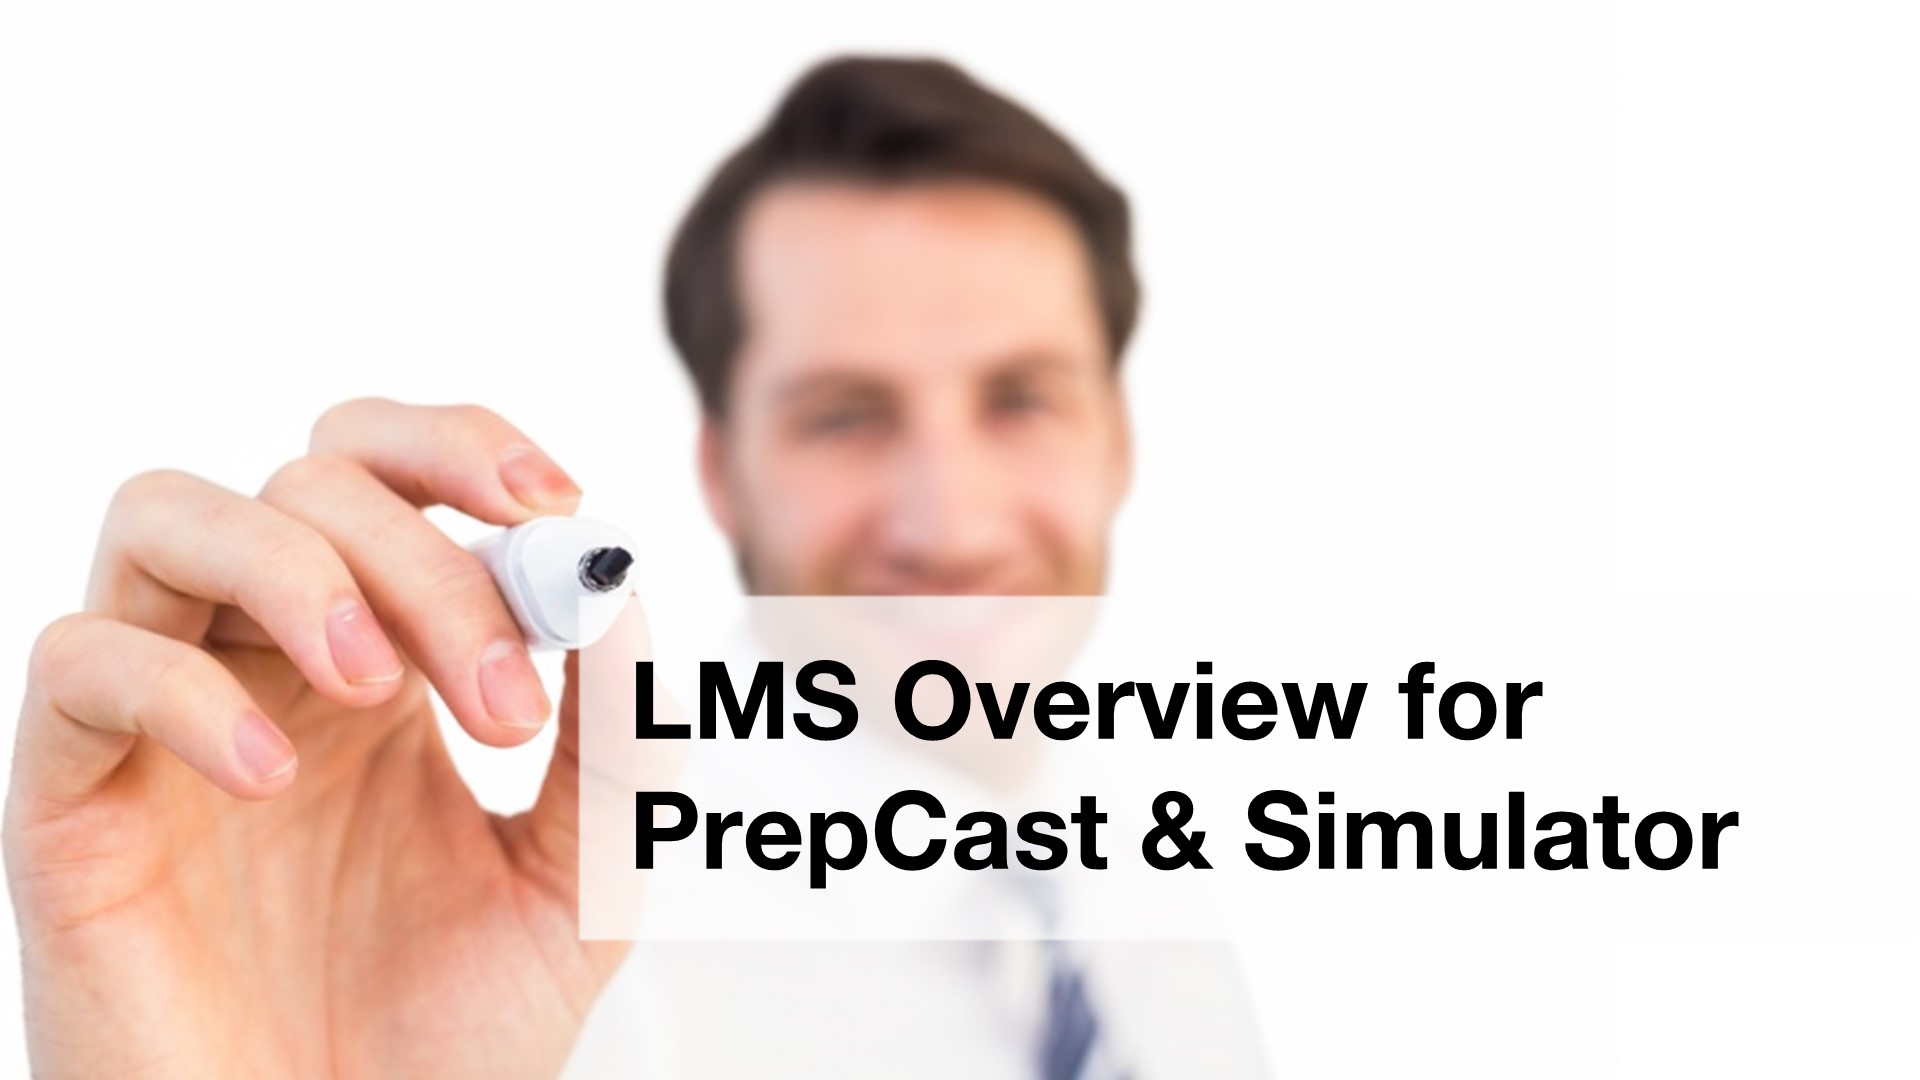 lms_howto_overview.jpg - 133.25 kB